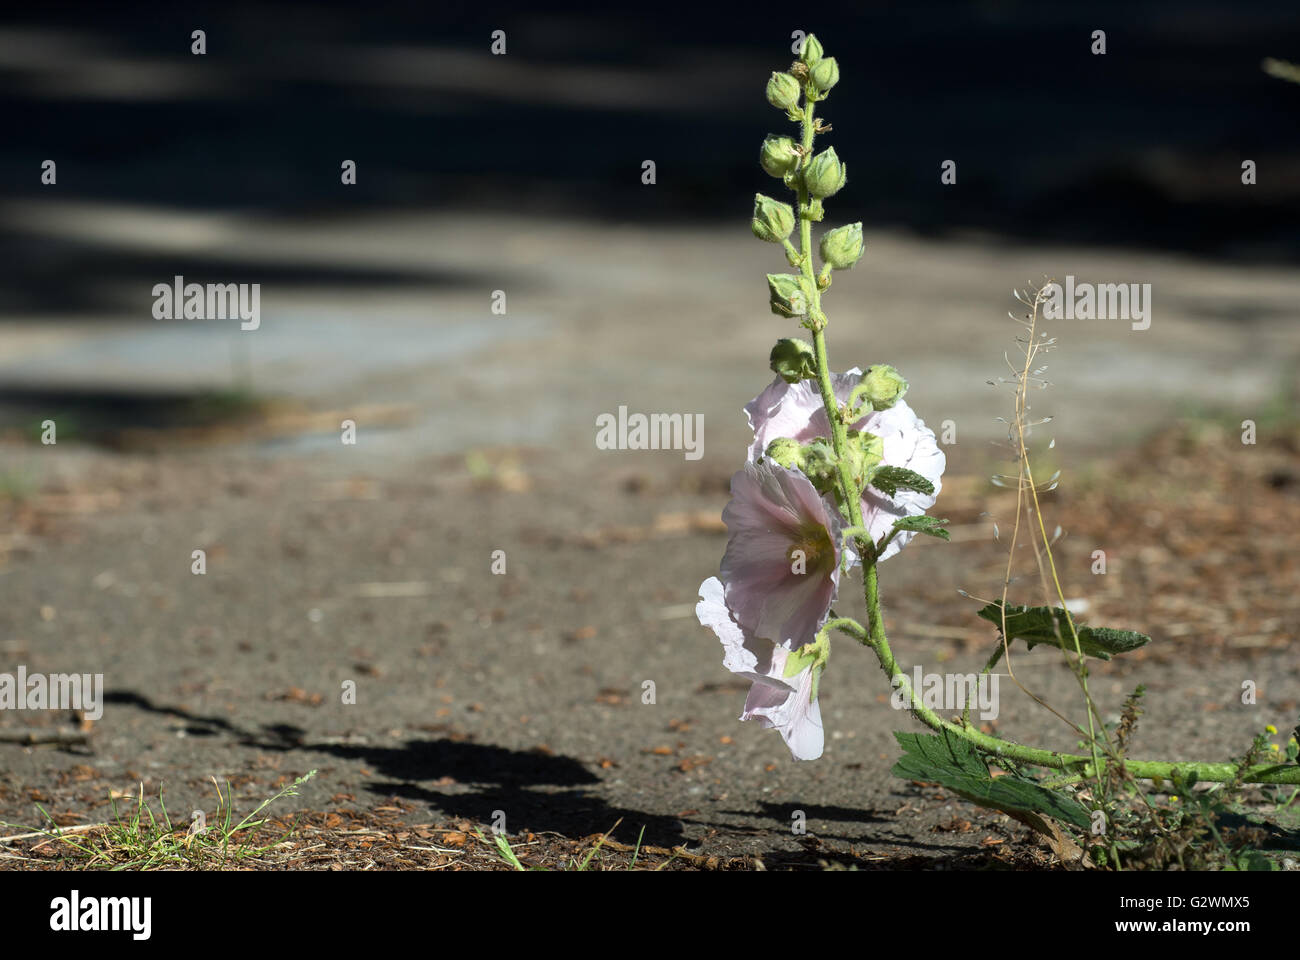 Berlin, Germany, blossoms of a plant on the roadside Stock Photo